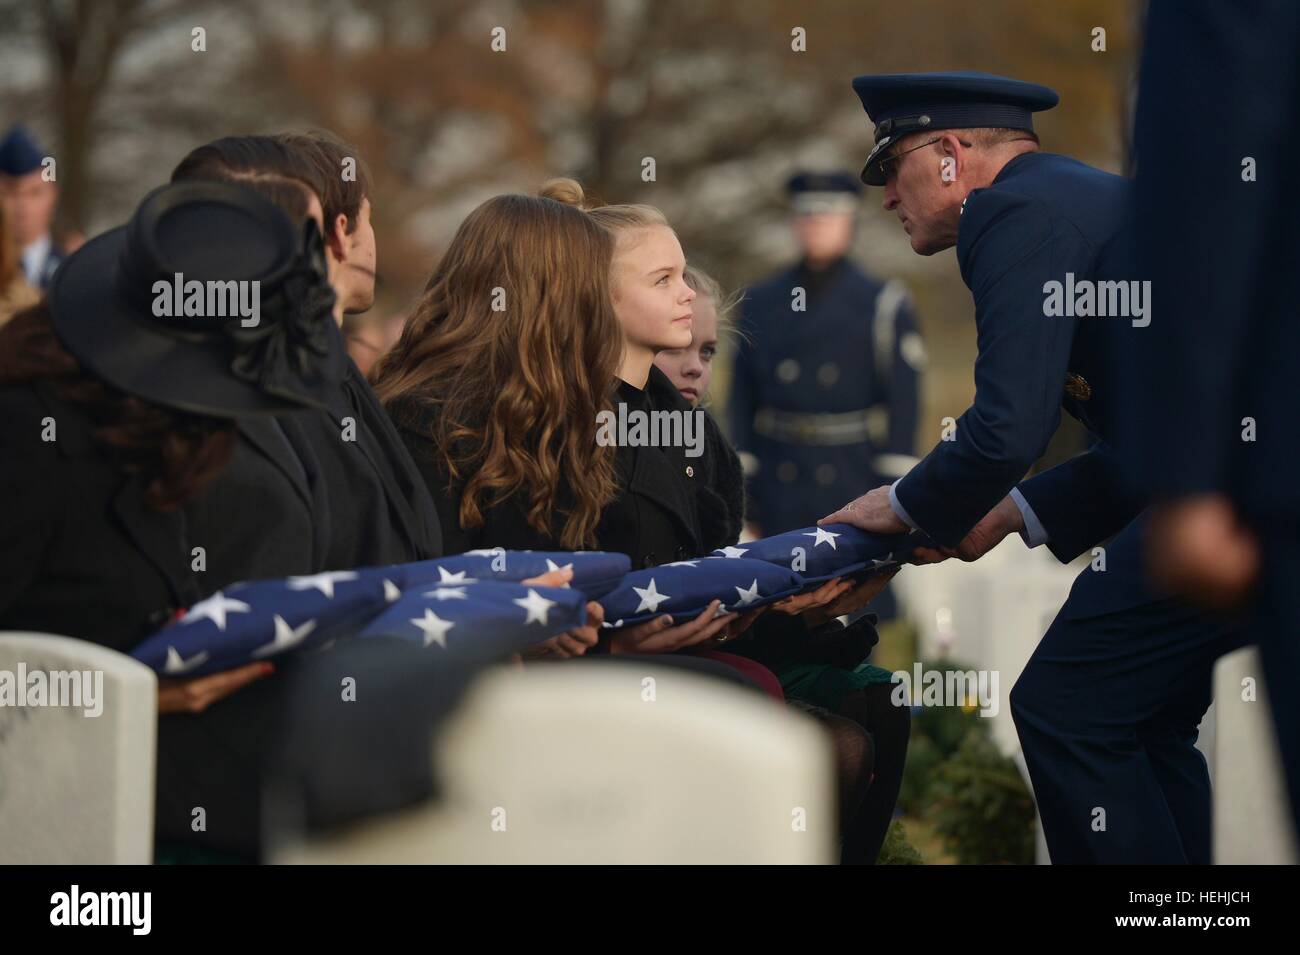 U.S. Air Force Assistant Deputy Chief of Staff of Operations Scott Vander Hamm presents a folded American flag to Annalise Gilbert during the interment for her father, fallen U.S. soldier Troy Gilbert at the Arlington National Cemetery December 19, 2016 in Arlington, Virginia. Gilbert was killed in 2006 when his F-16C Fighting Falcon aircraft crashed near Baghdad, Iraq during a combat mission. Stock Photo